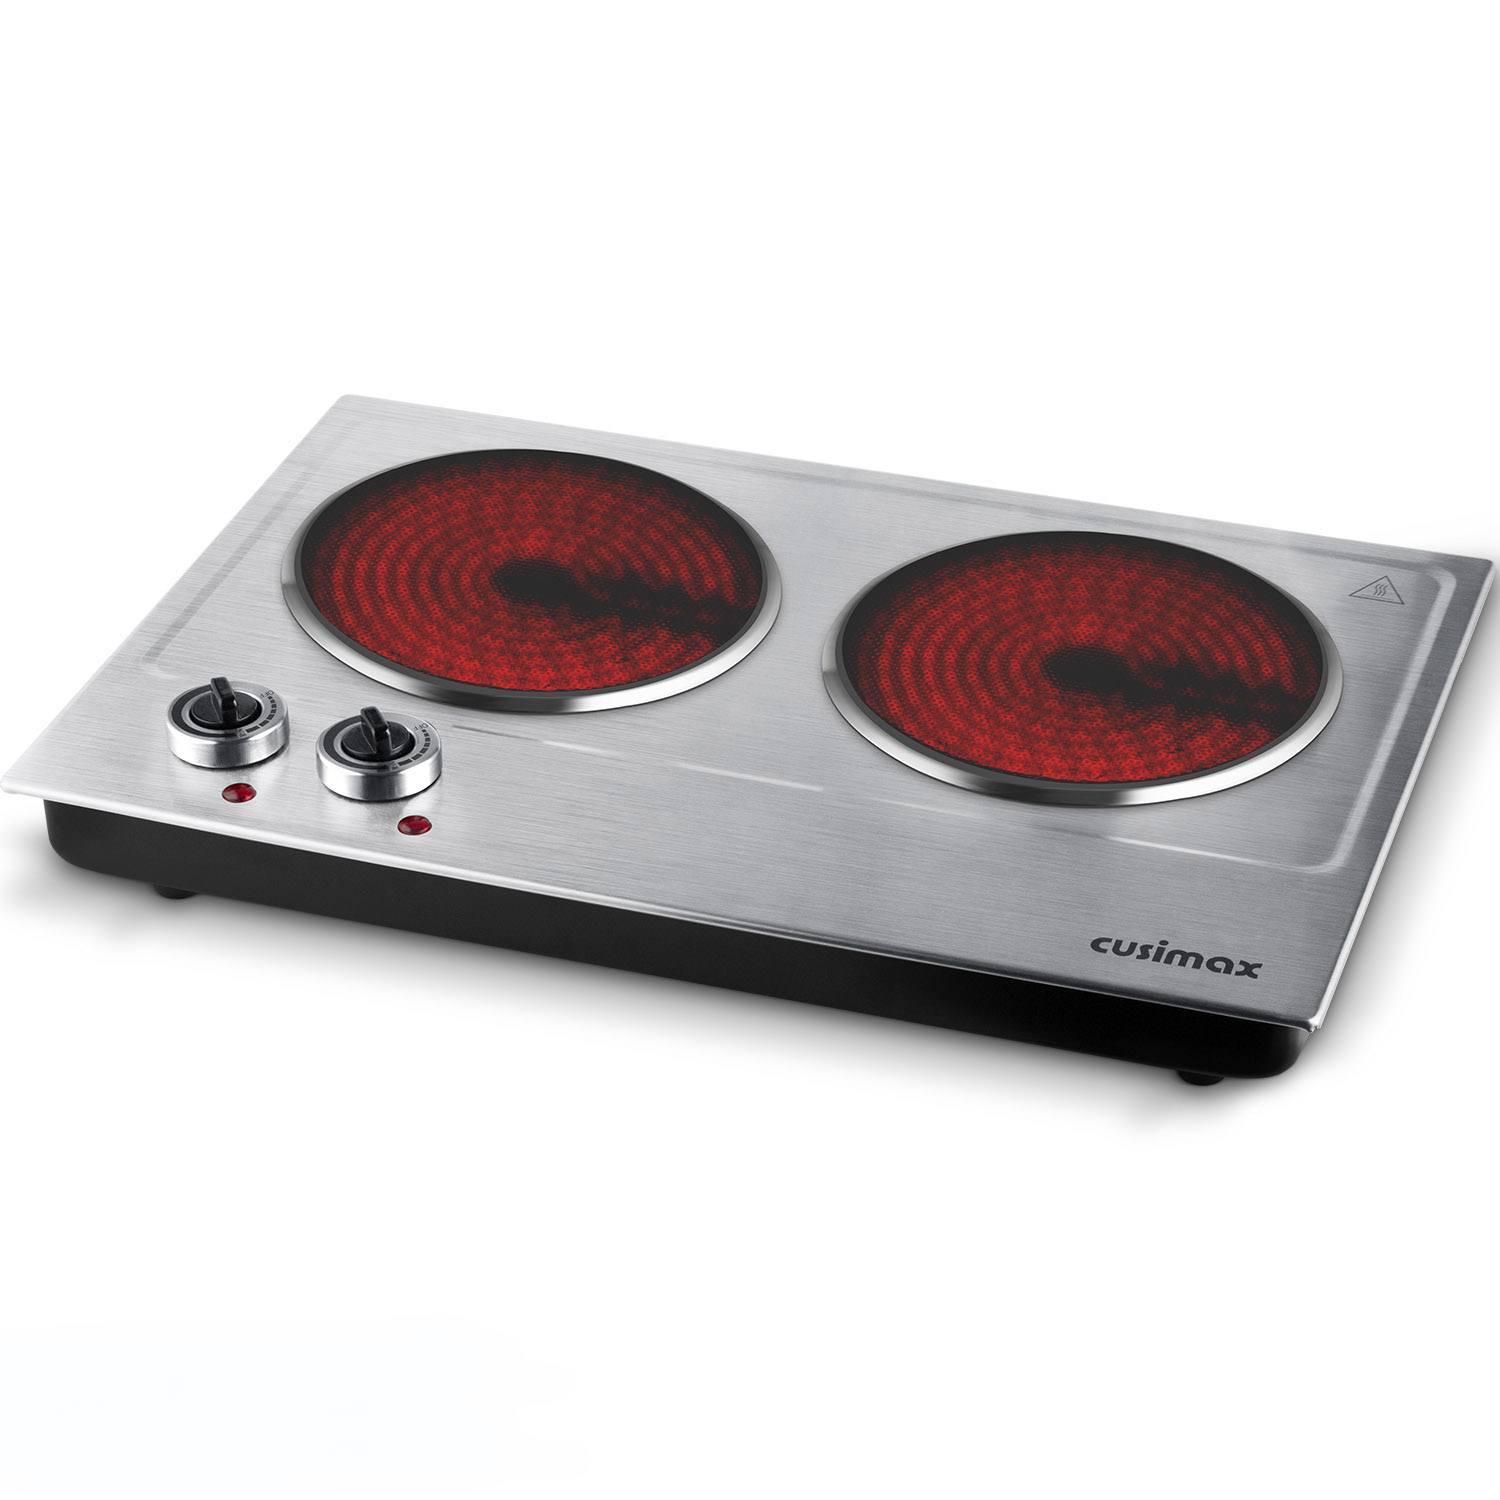 Cusimax 1800W Infrared Ceramic Electric Hot Plate for Cooking, Portable Countertop Burner Glass Heating Plate with 2 Knob Control,Stainless Steel Electric Stove,Easy To Clean